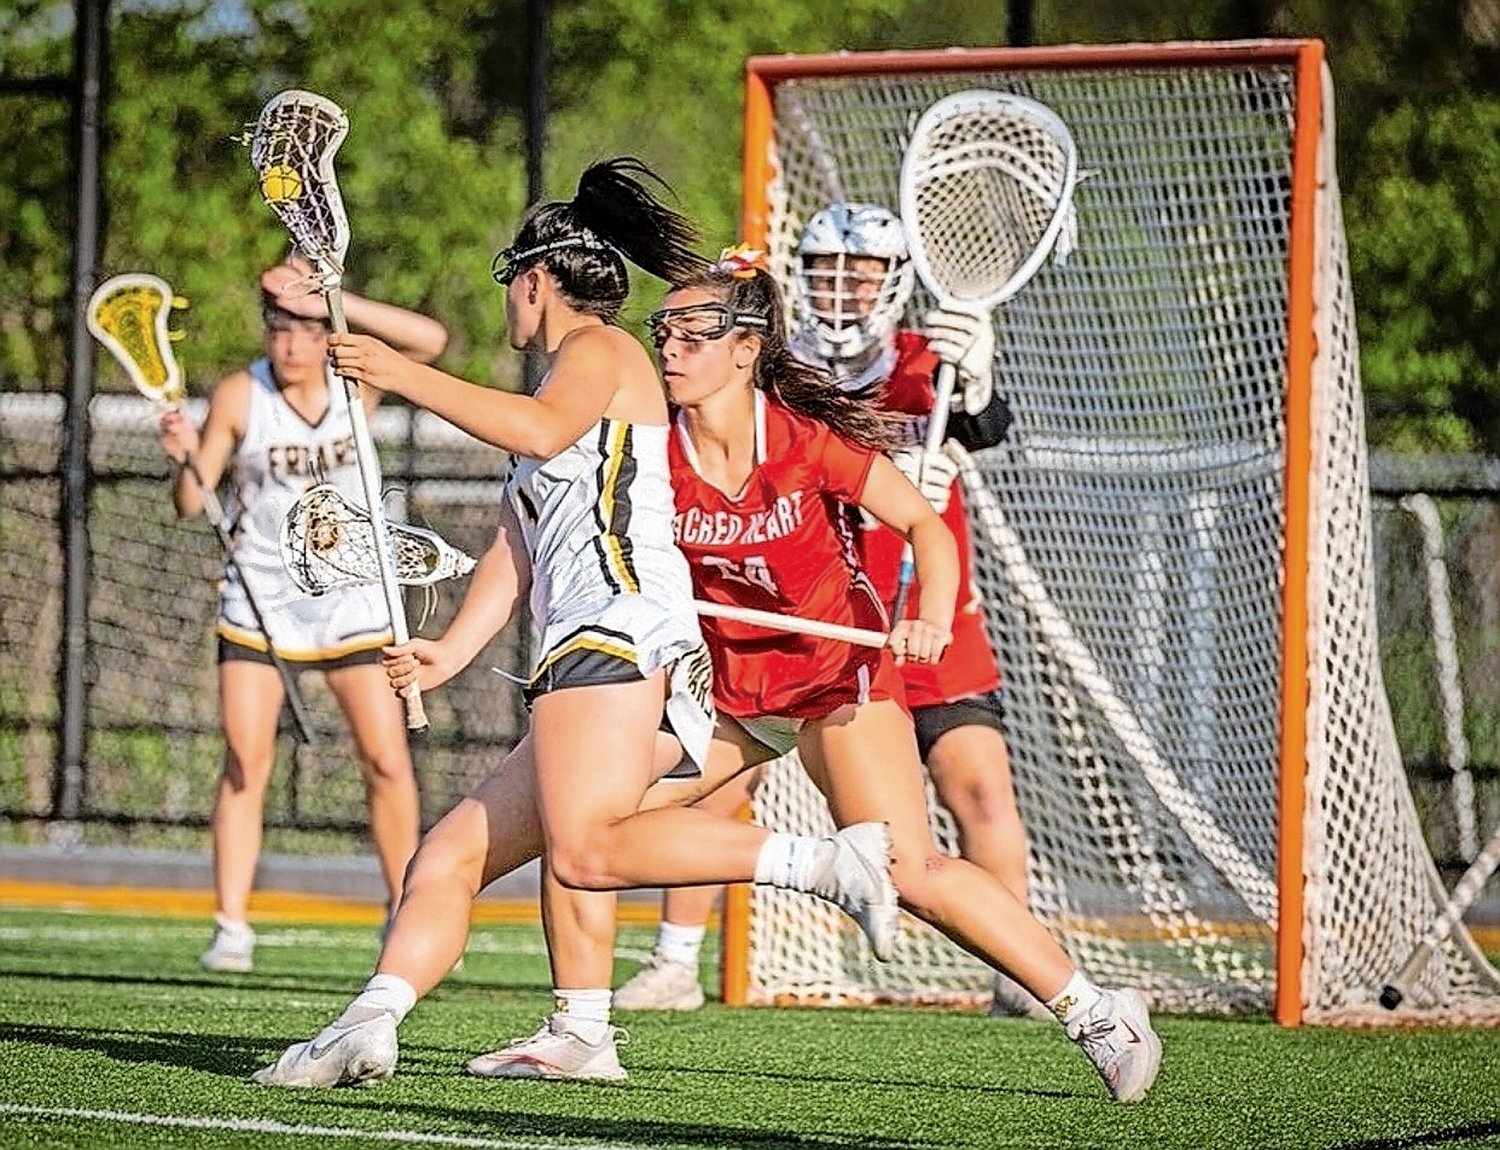 Thanks to her work with a foundation named in memory of Rockville Centre’s own Mary Ruchalski, Sophia Paesano — No. 24 — was awarded the U.S. Lacrosse Jackie Pitts Award soon after she graduated from Sacred Heart Academy.